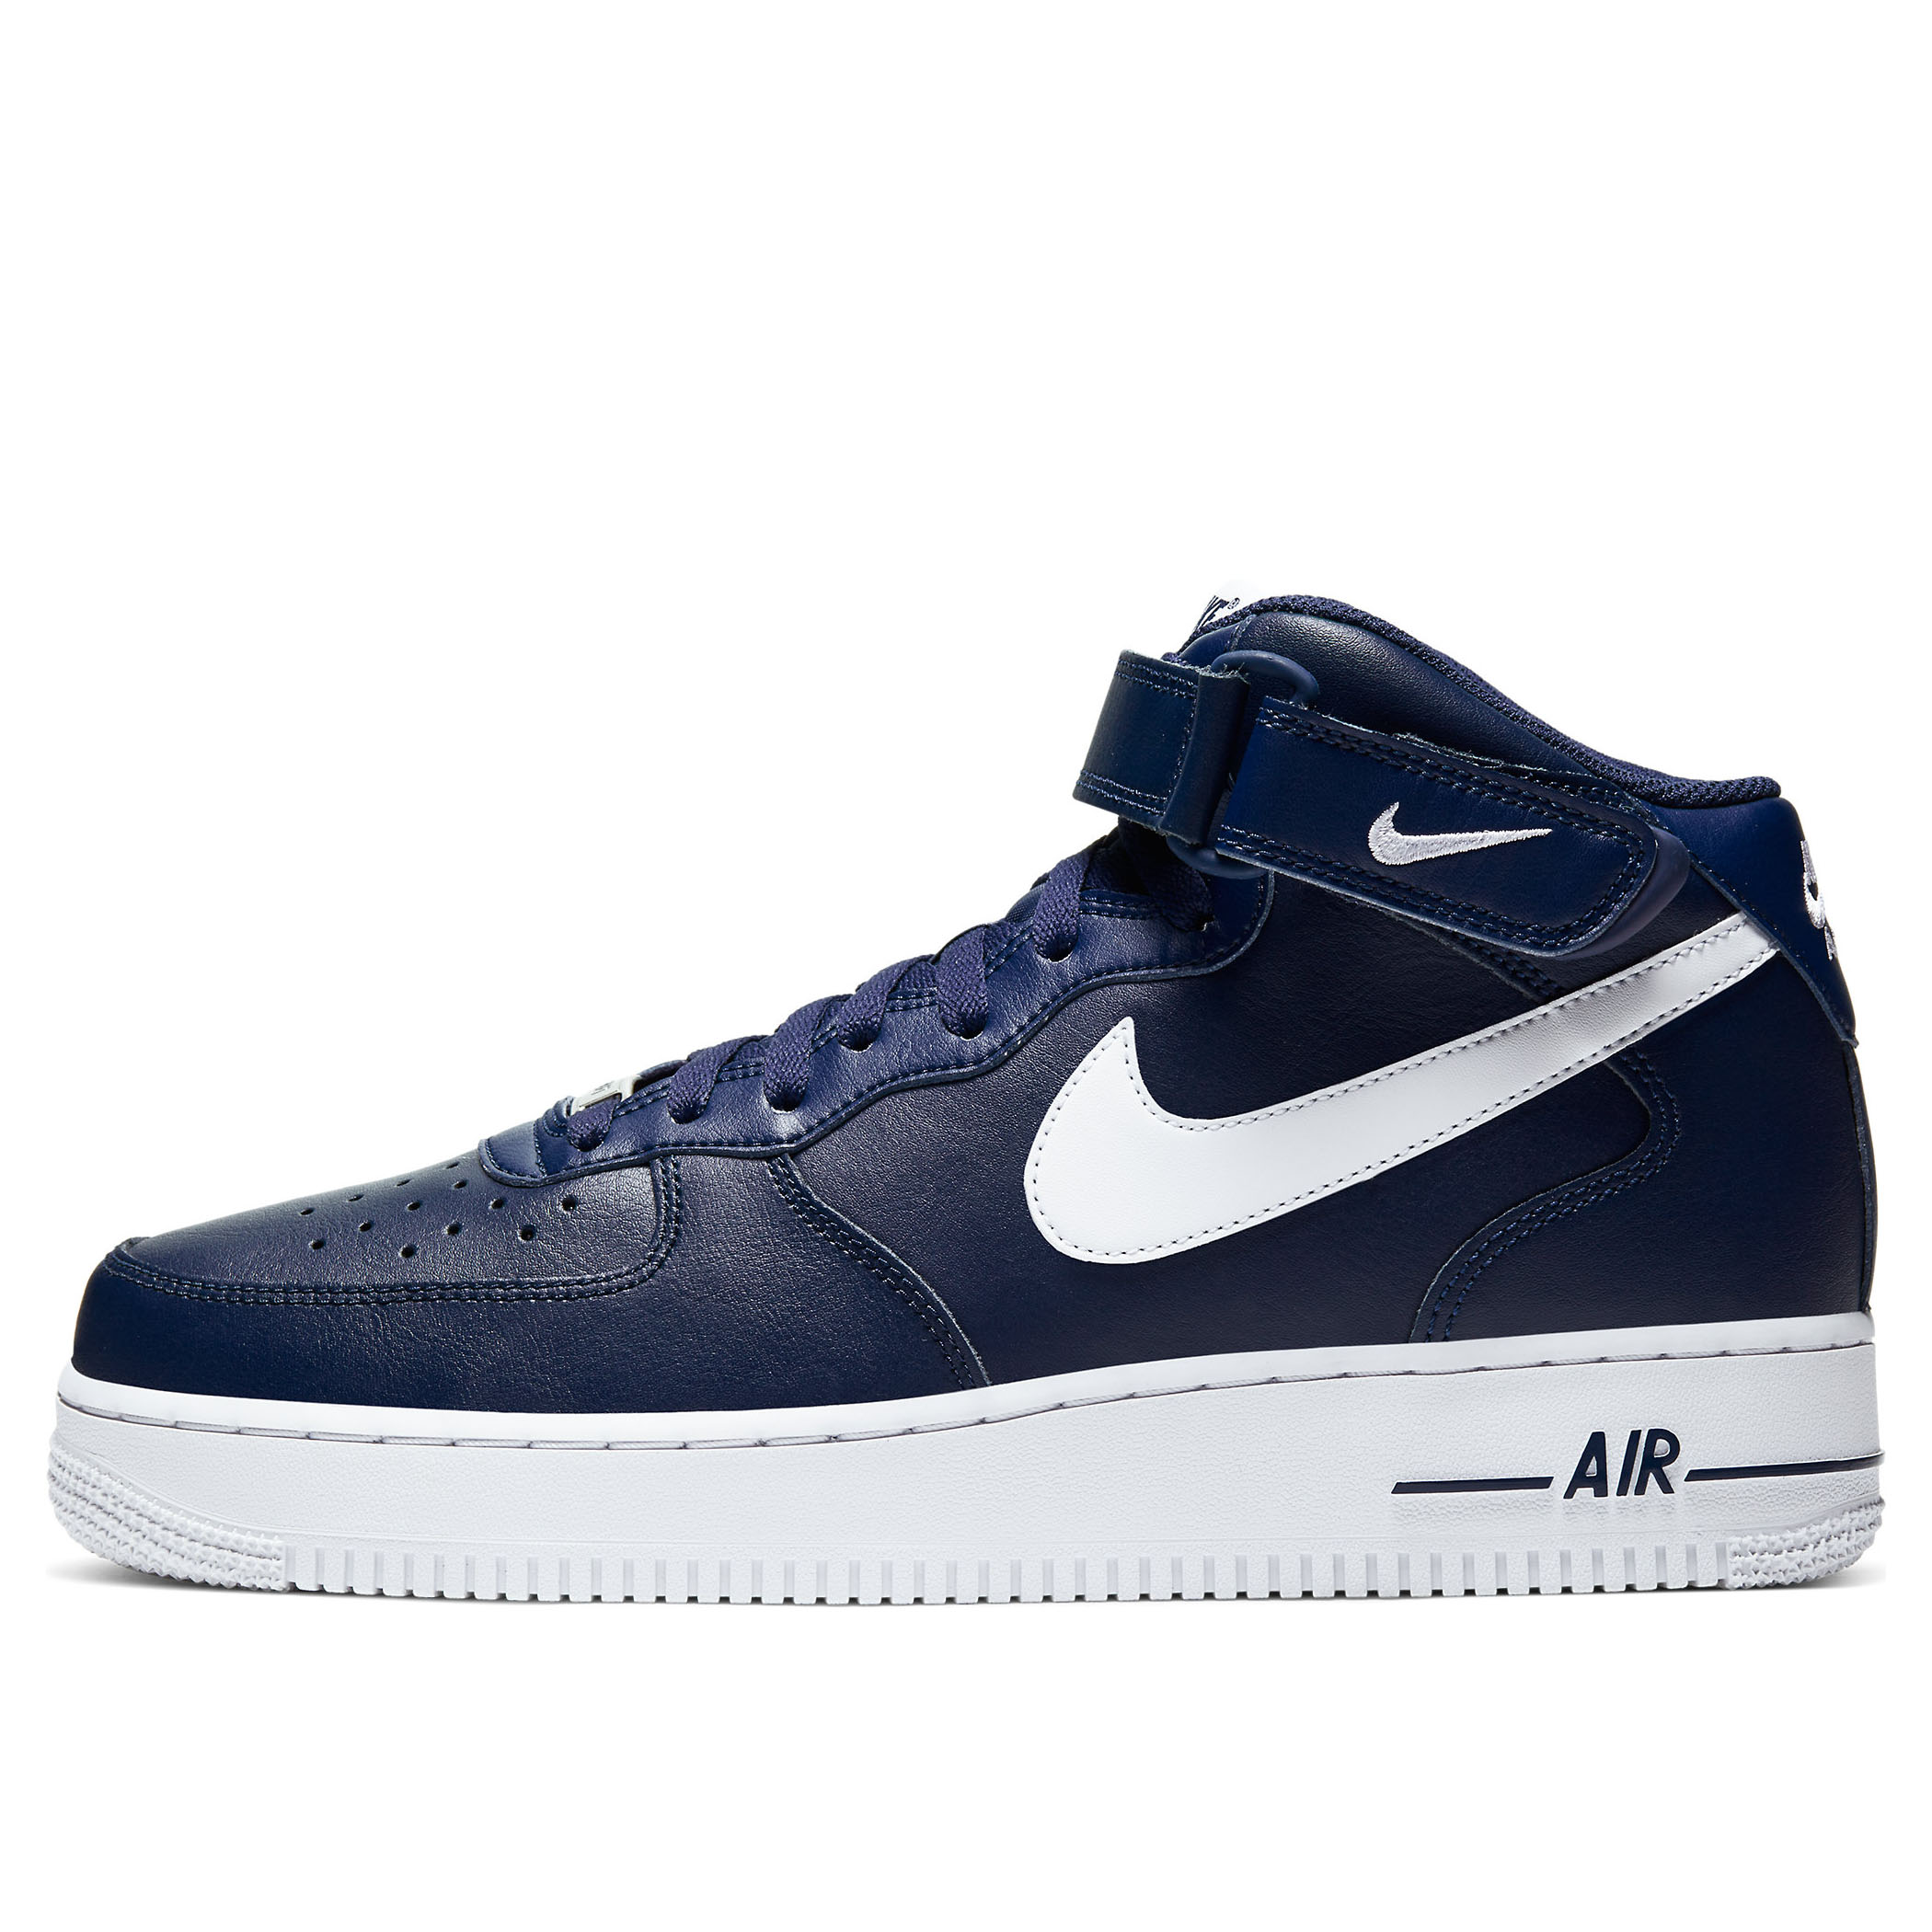 white midnight navy air force 1